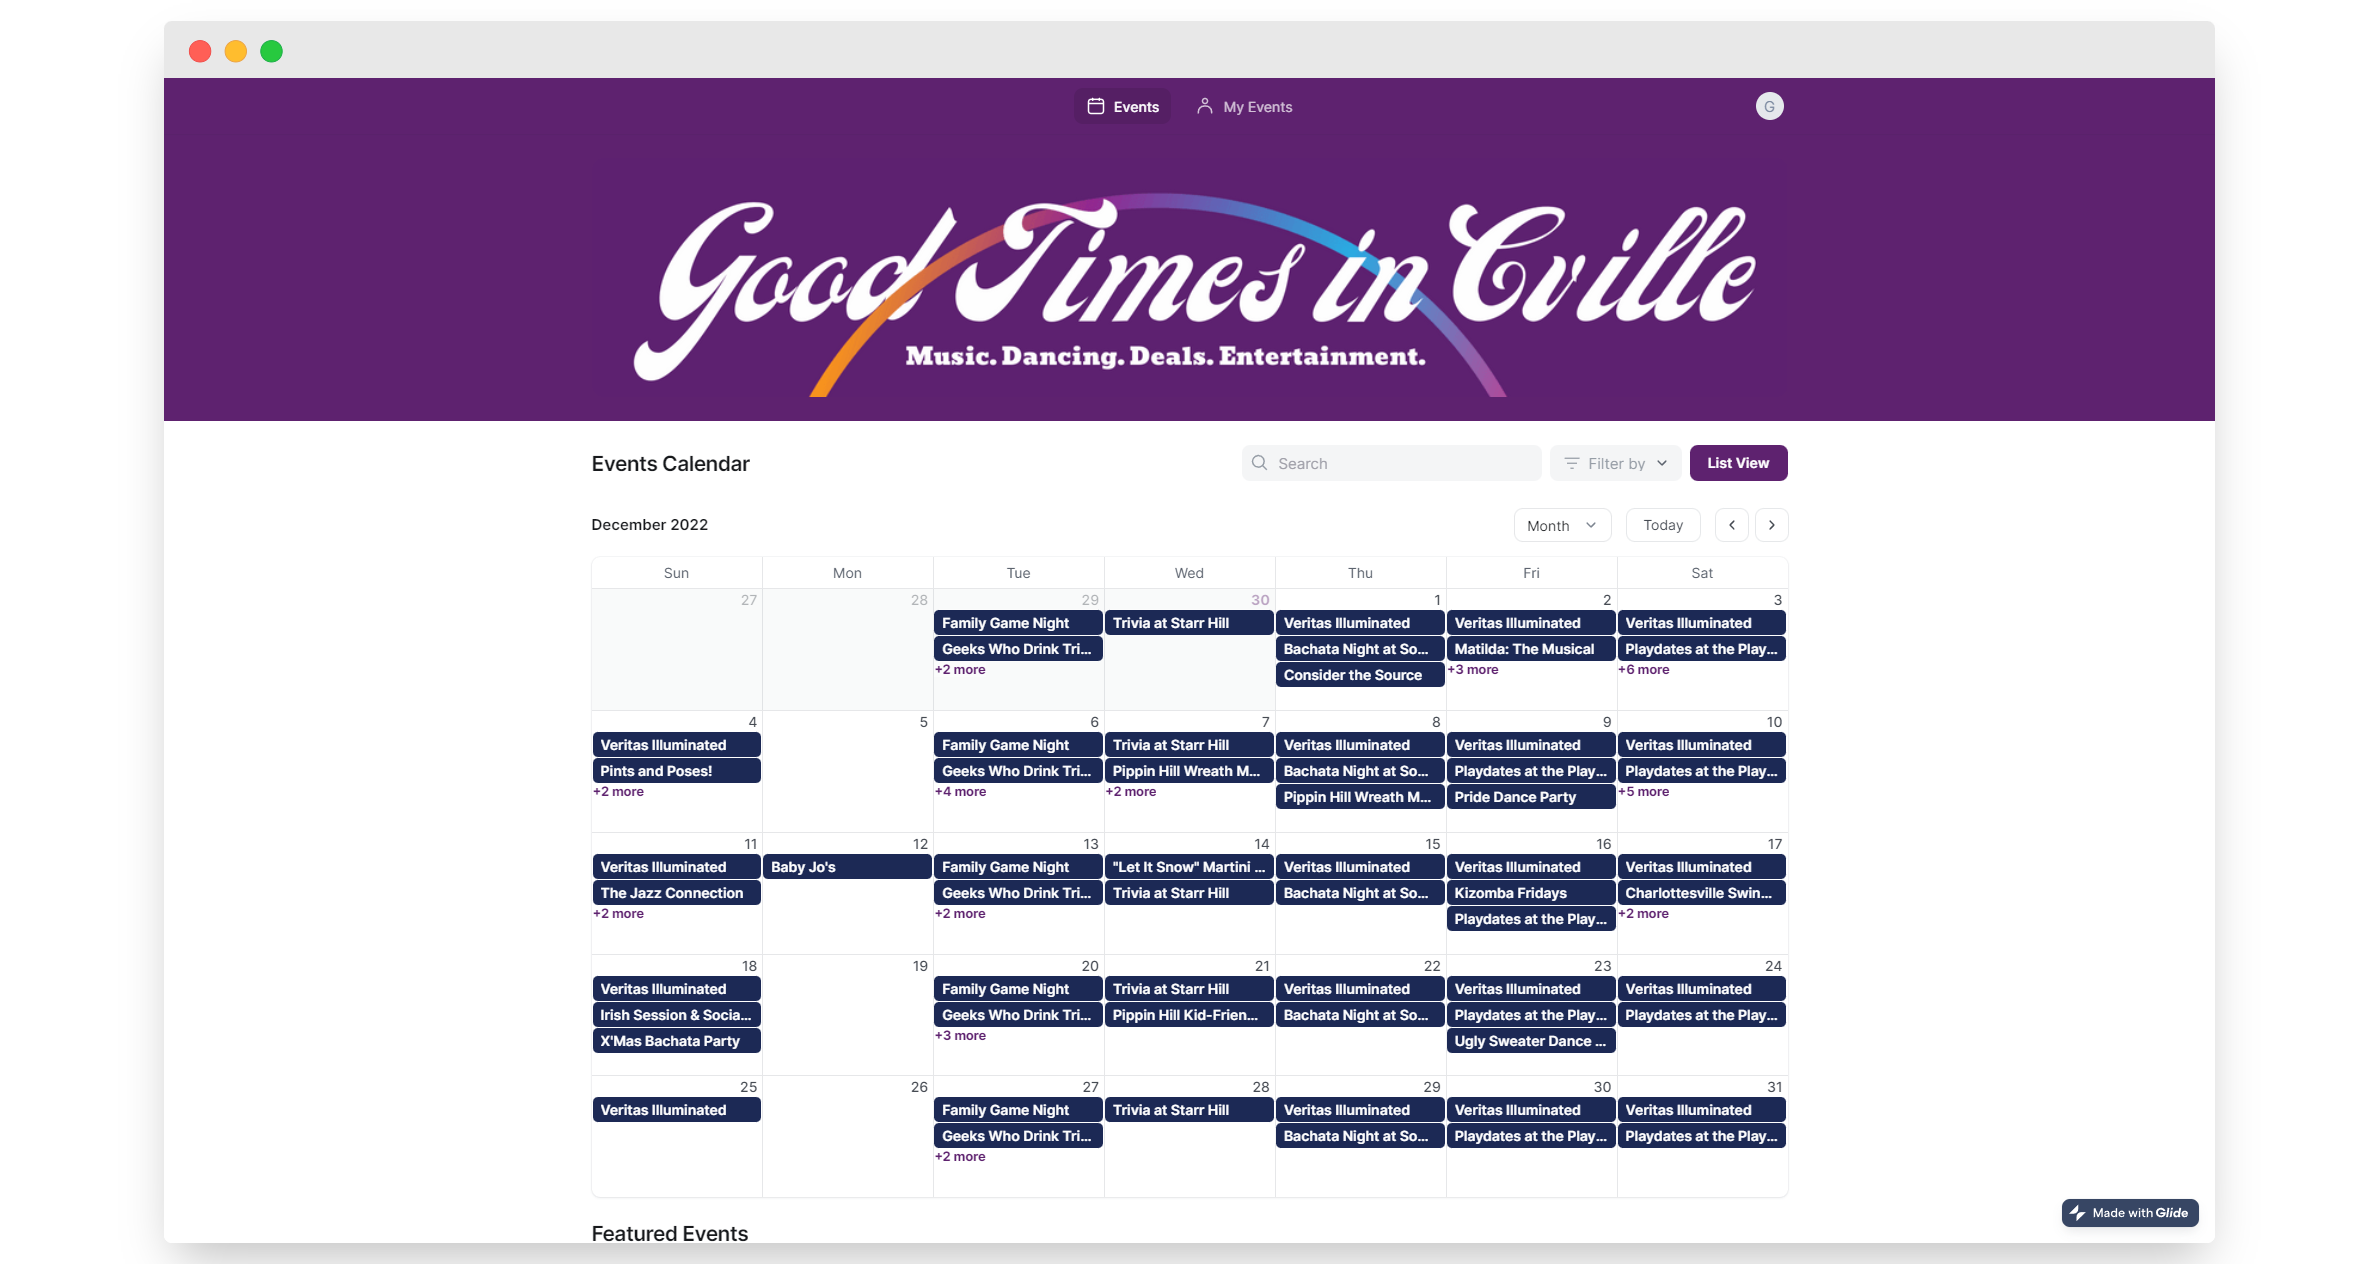 Charlottesville Events Calendar Good Times in Cville